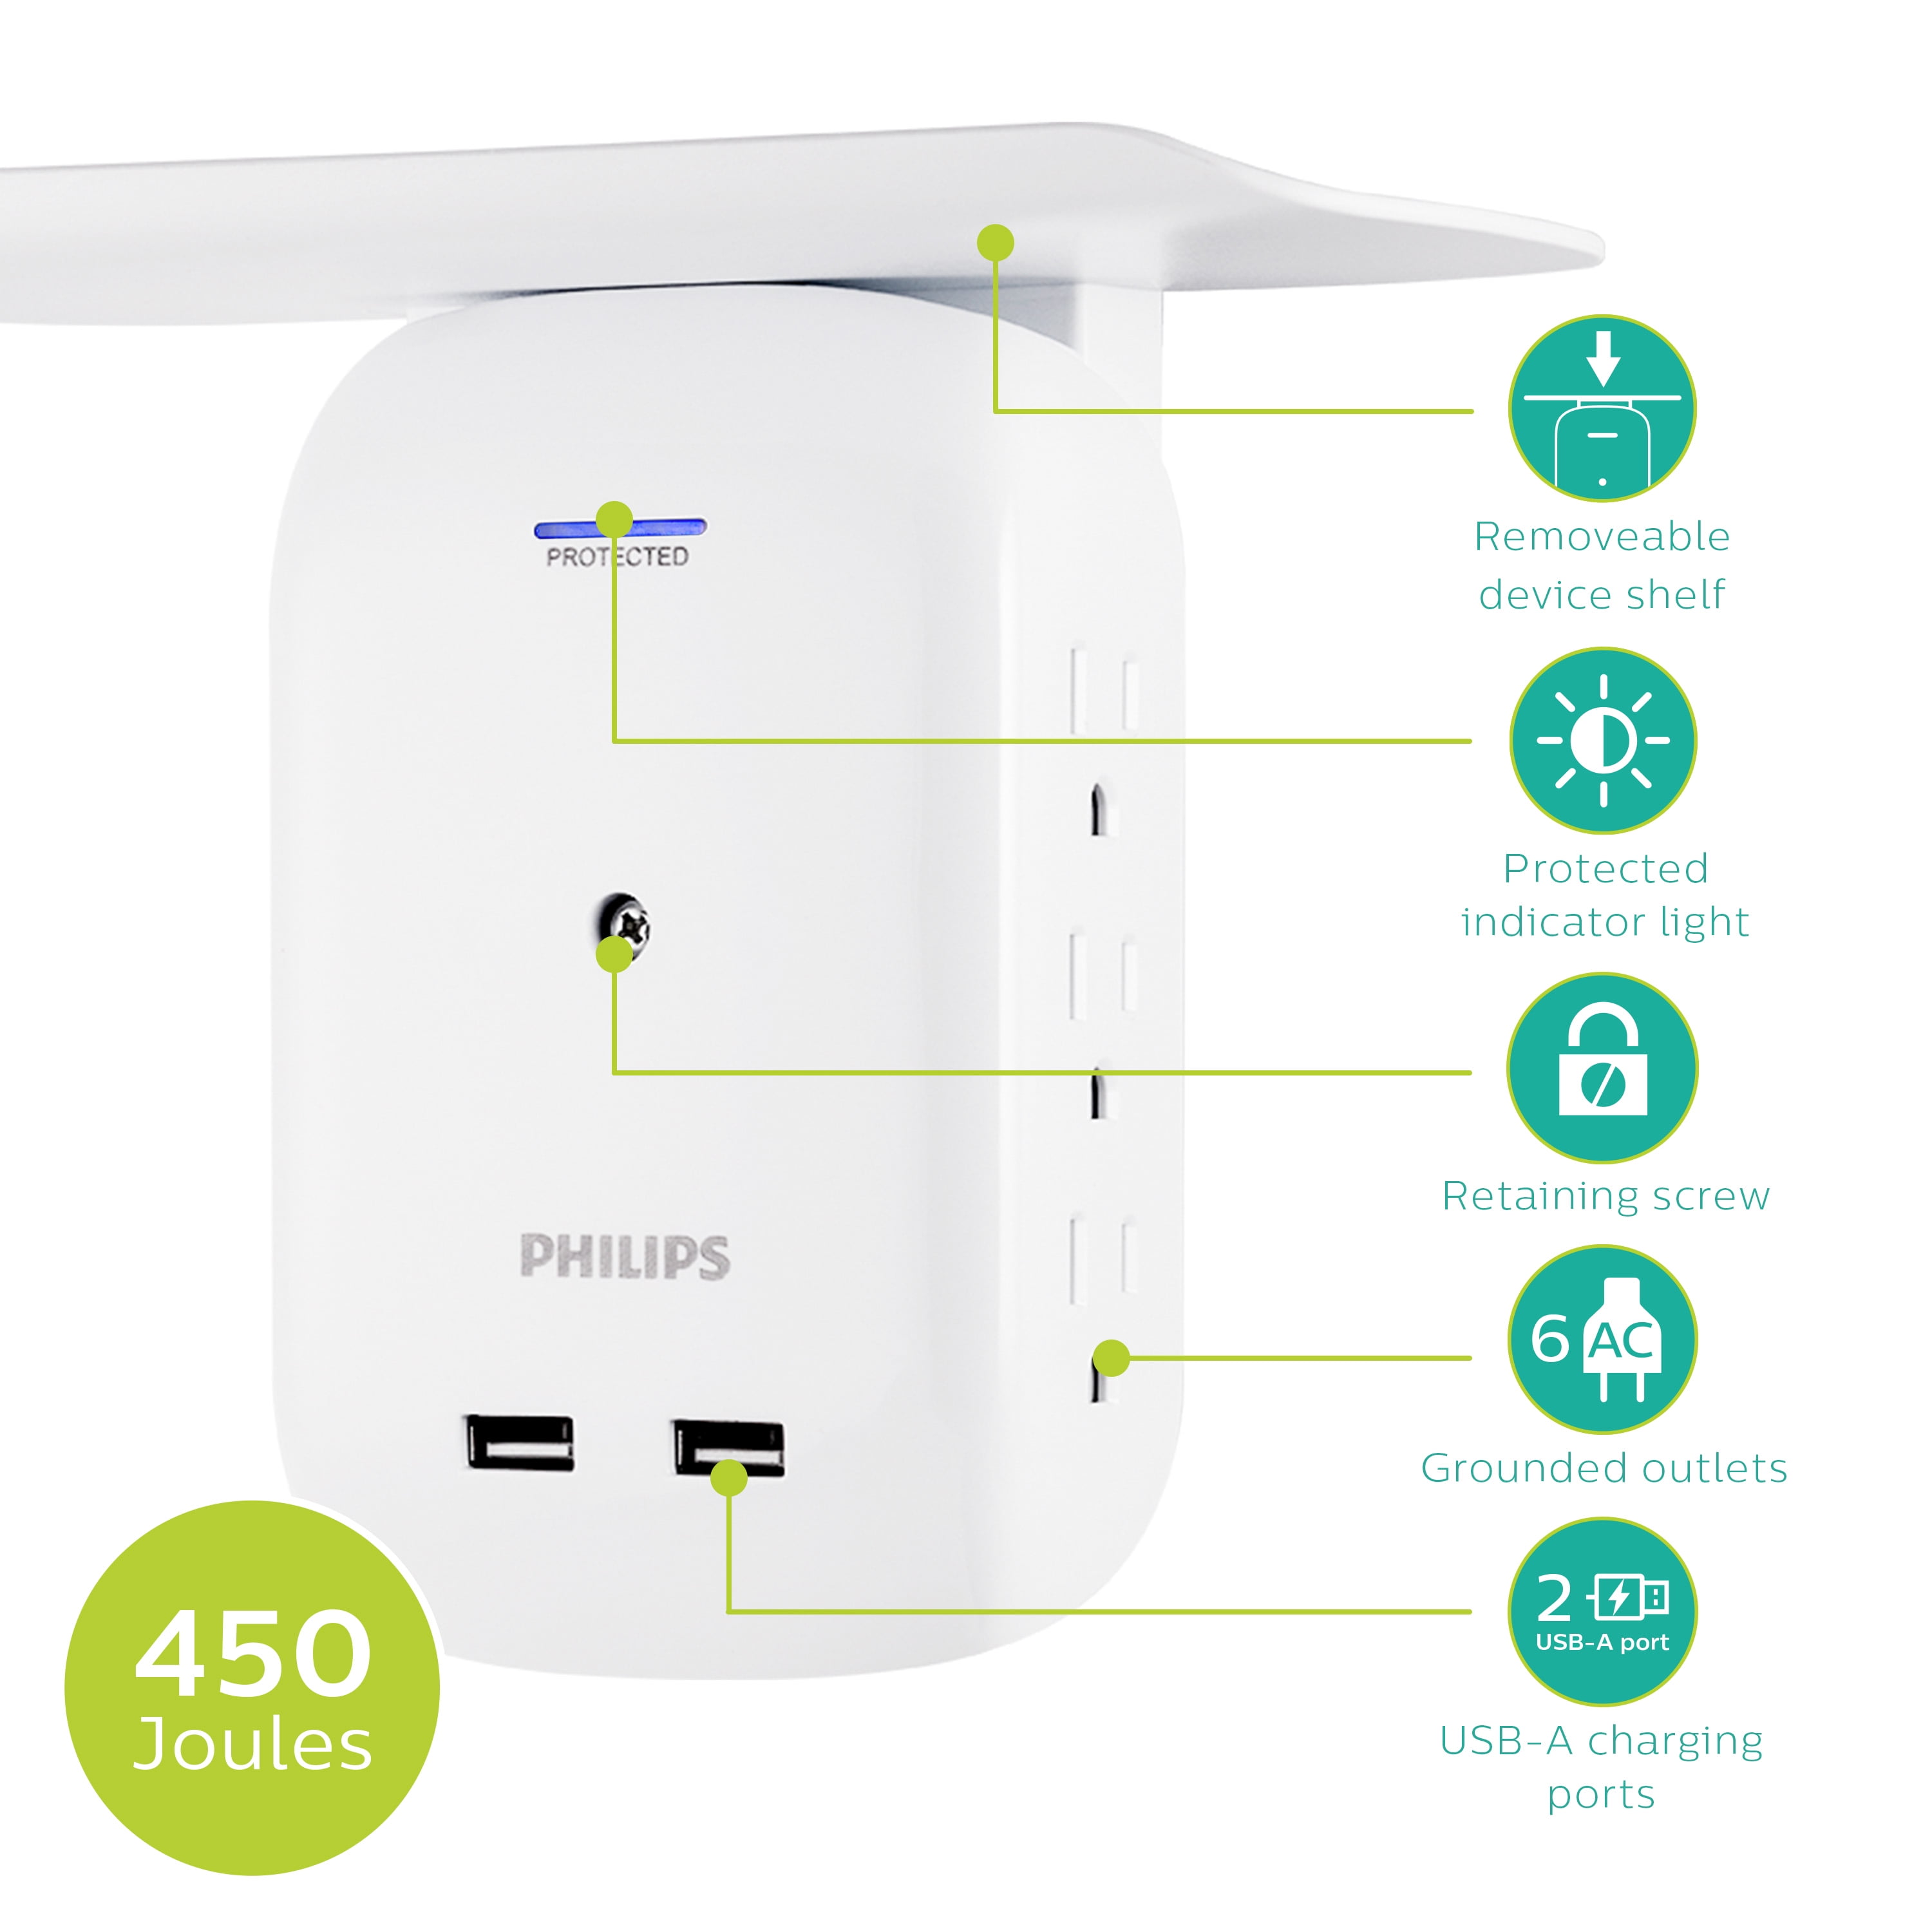 Philips 6-Outlet Surge Protector Tap with Device Shelf, 450J, 2 